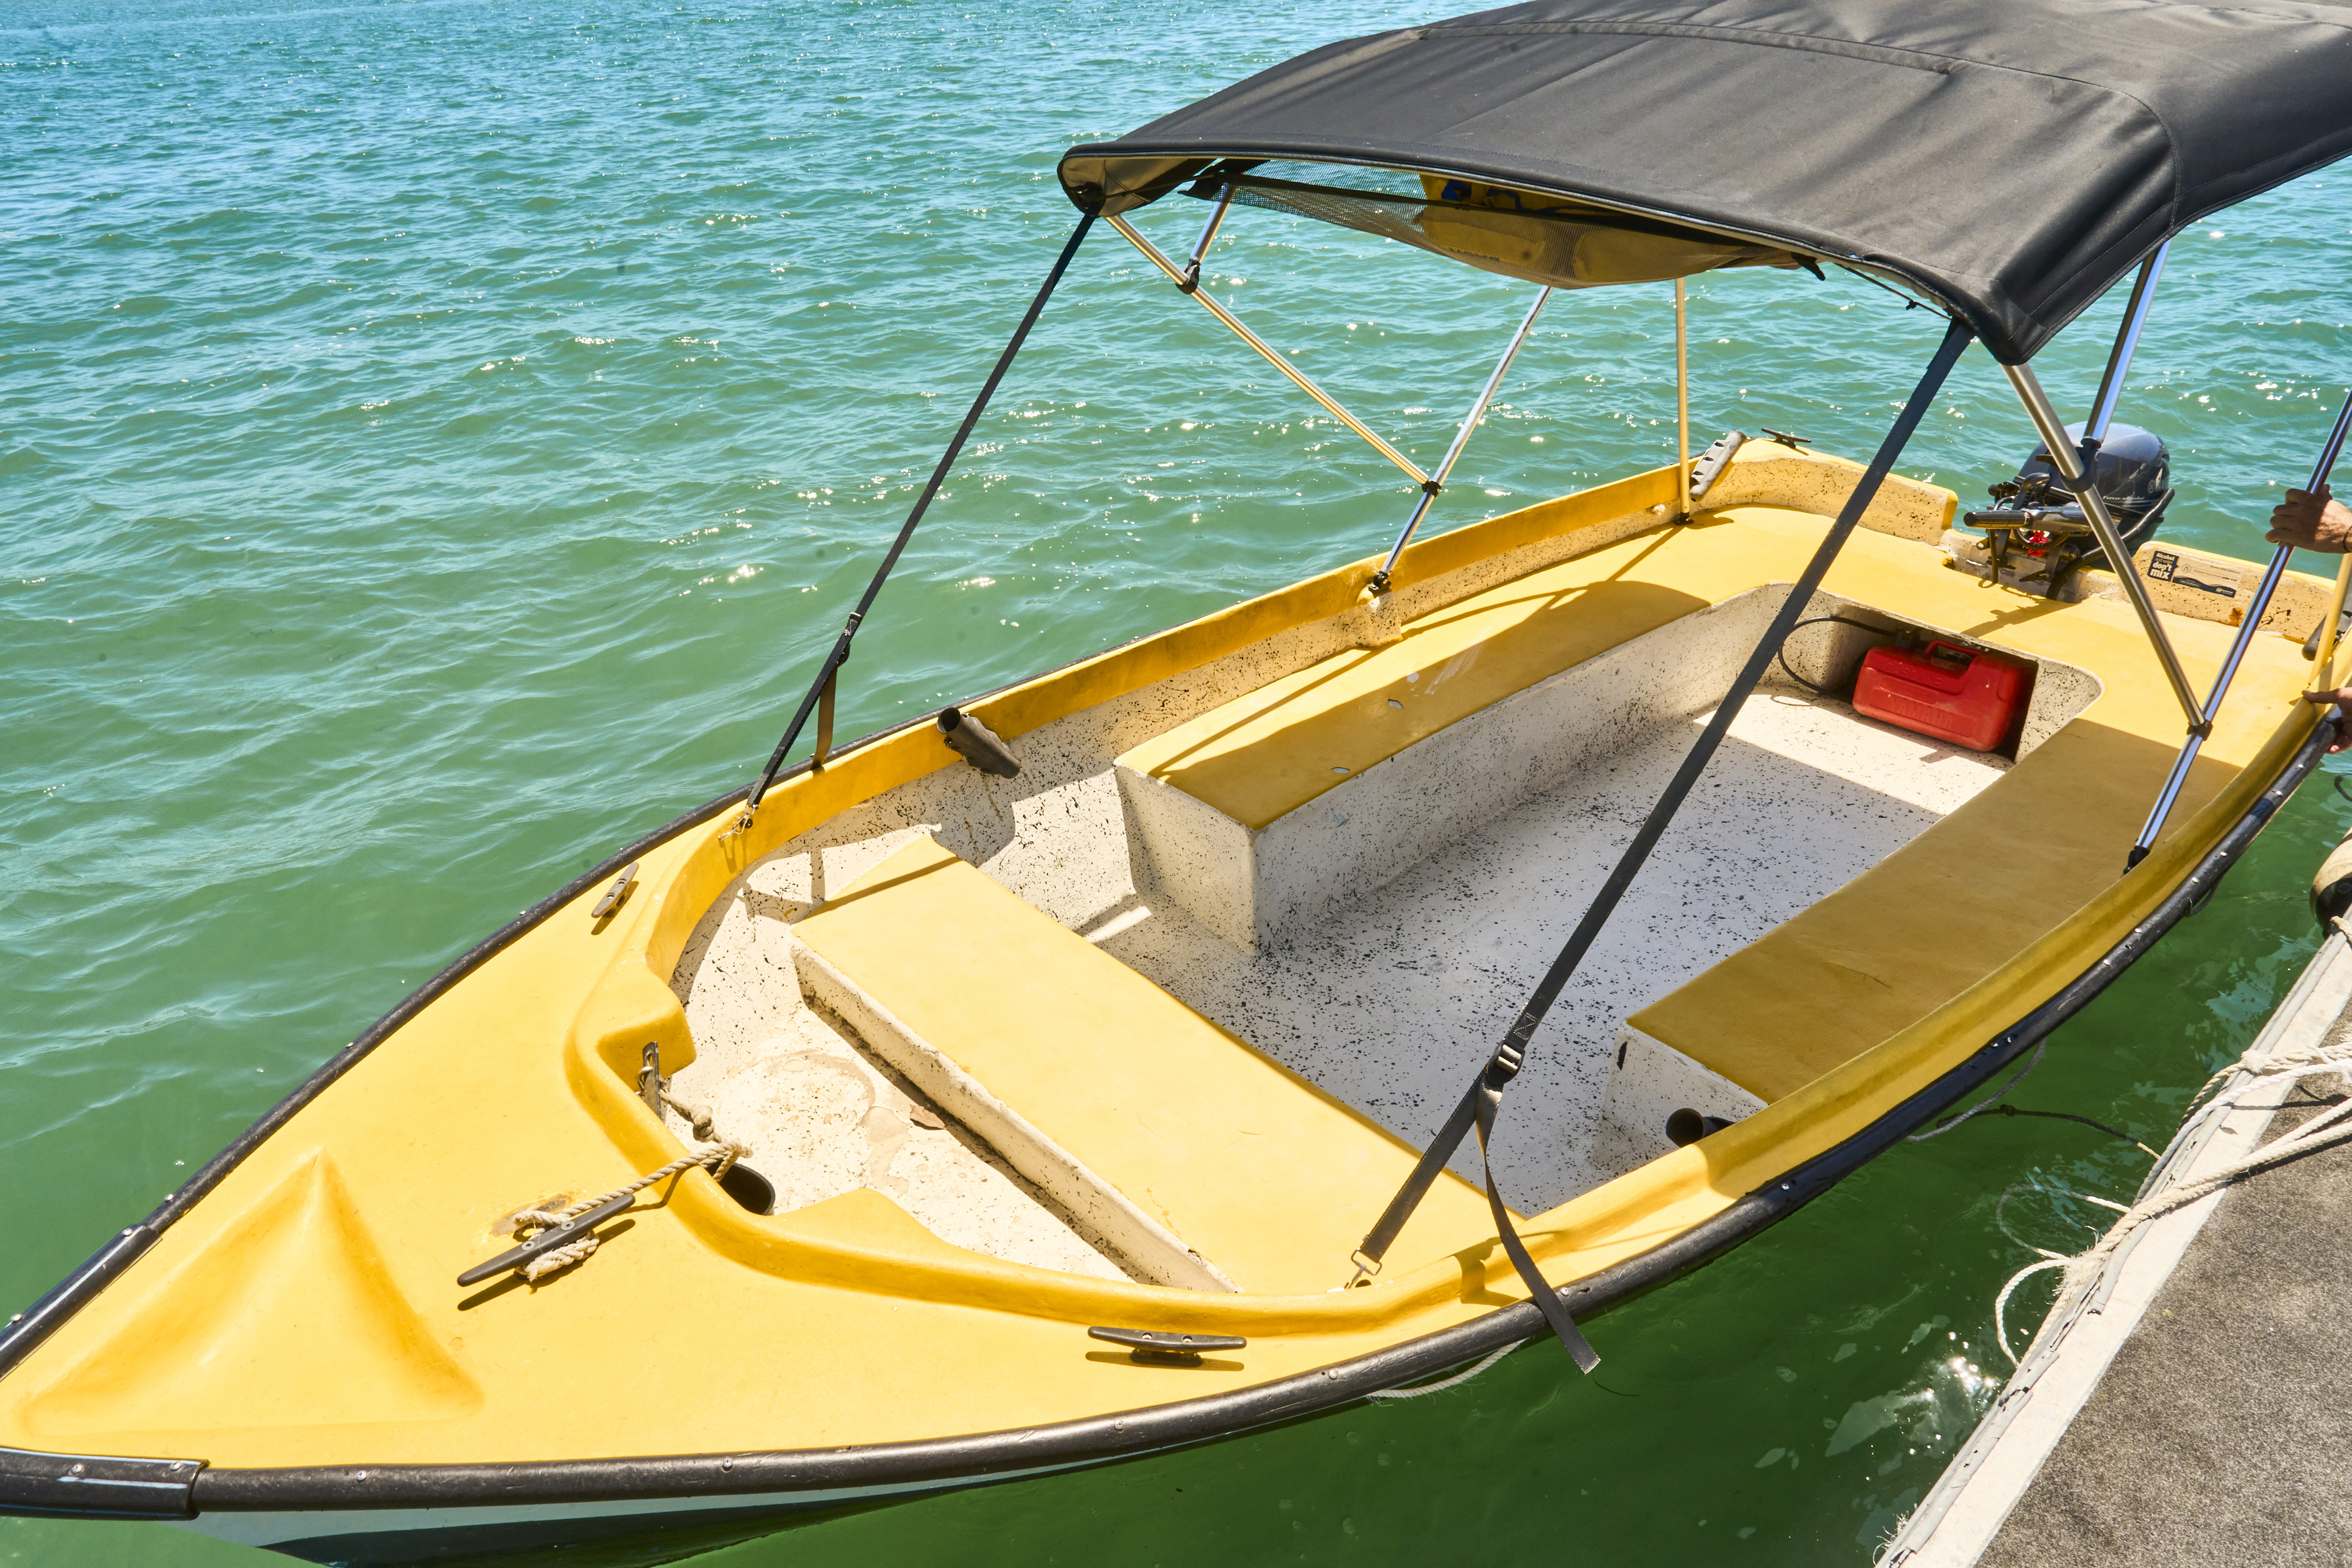 Runabout / Dinghy 6 People - Pelican Boat Hire